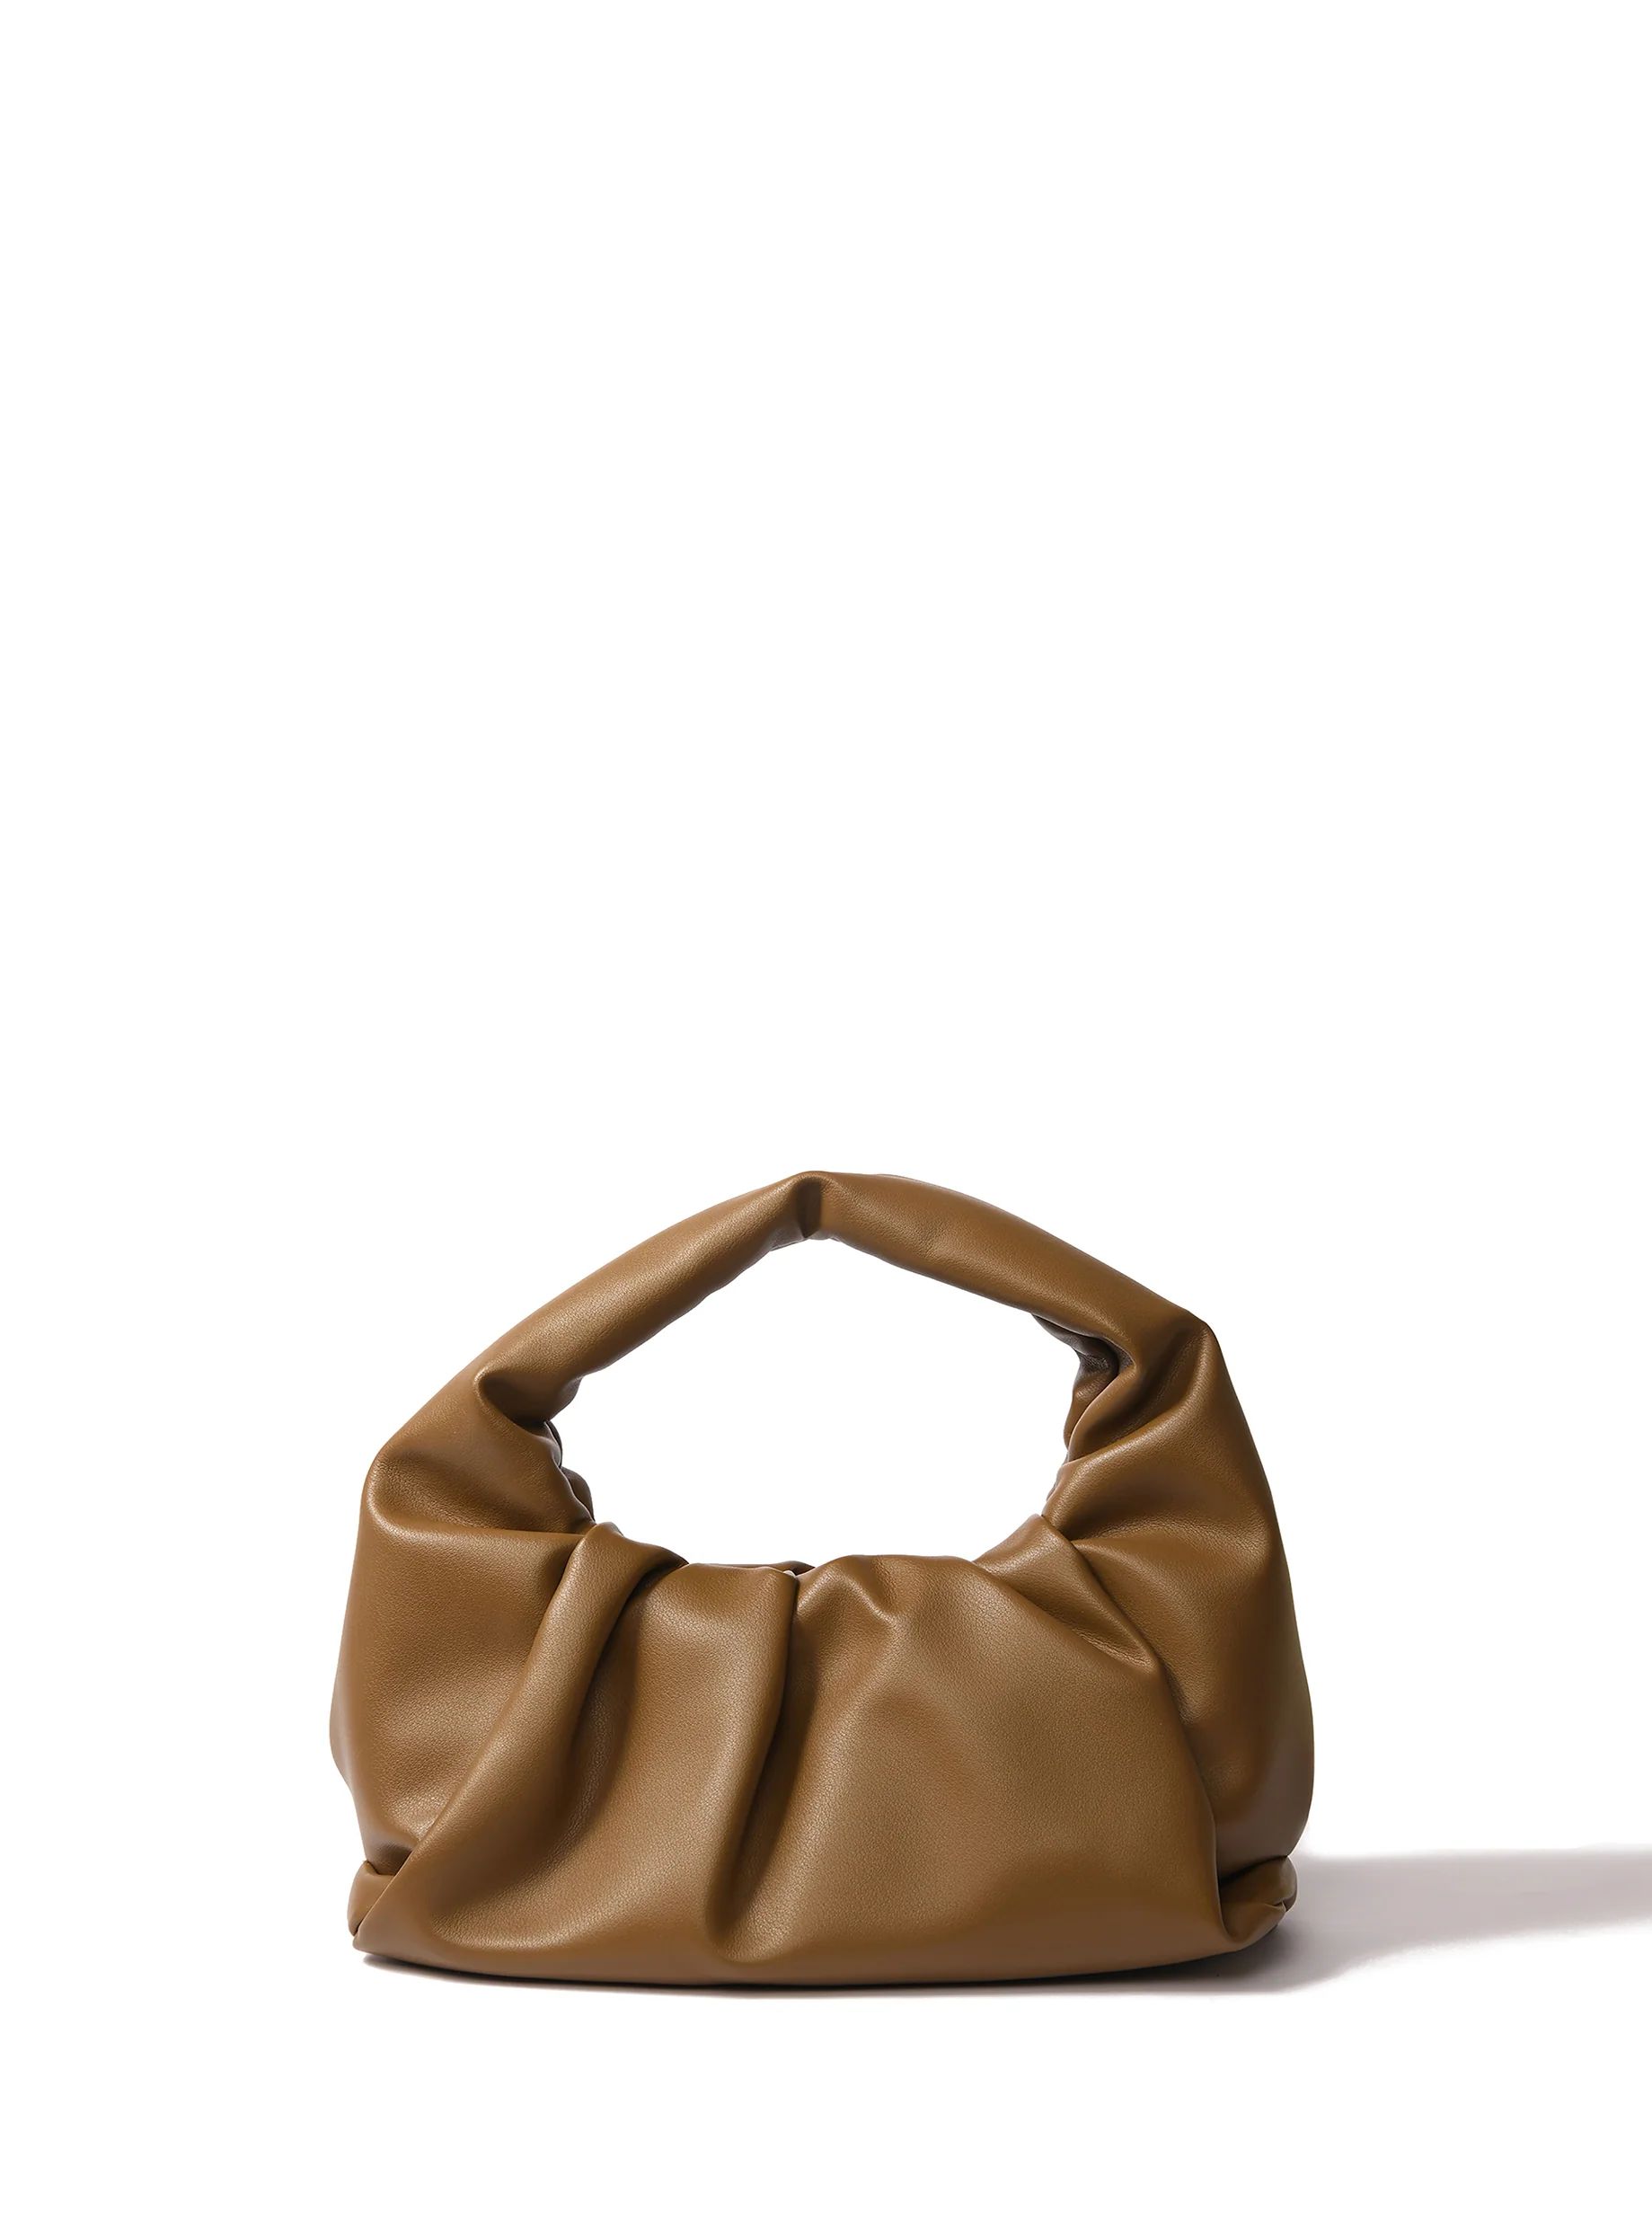 Marshmallow Croissant Bag in Soft Leather, Mustard Green | Bob Ore Blue Collection